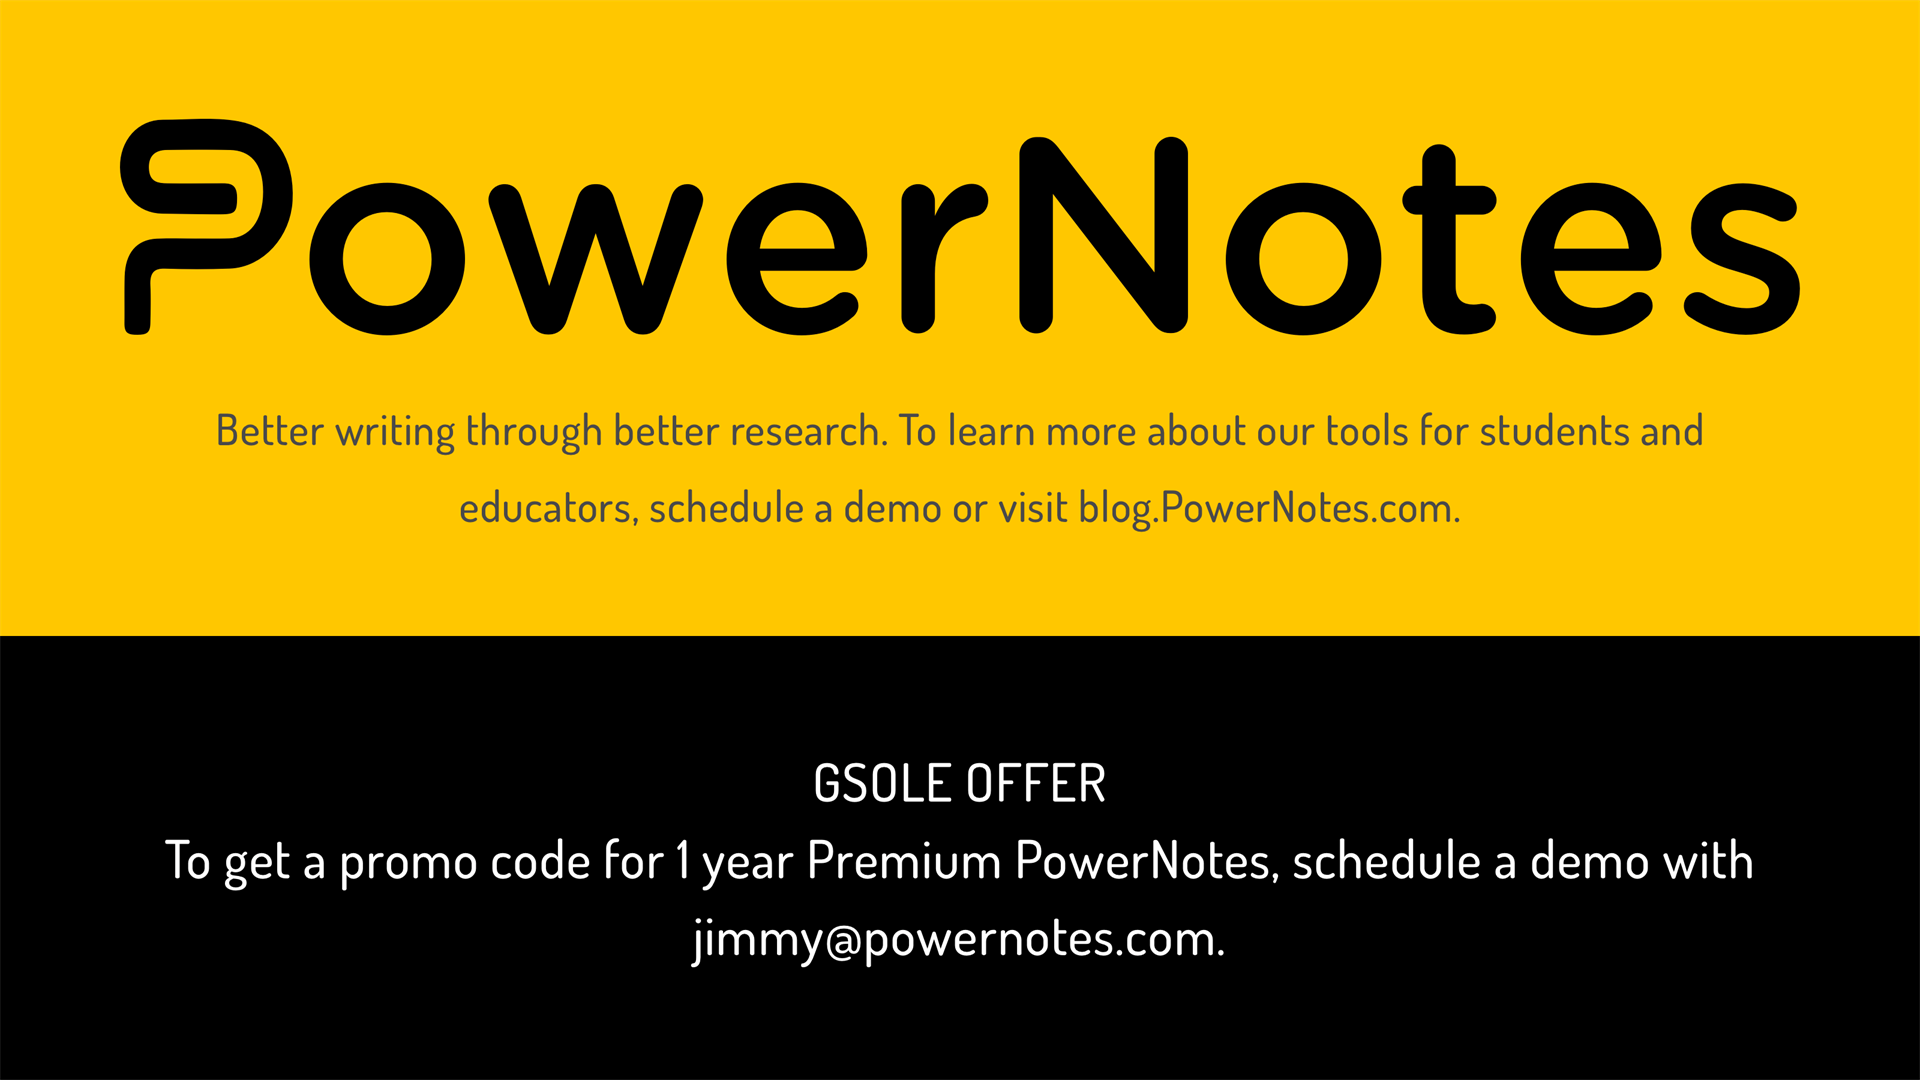 PowerNotes Placard: "Power Notes: "Better Writing Through better research. To learn more about our tools for students and educators schedule a demo or visit blog PowerNotes.com